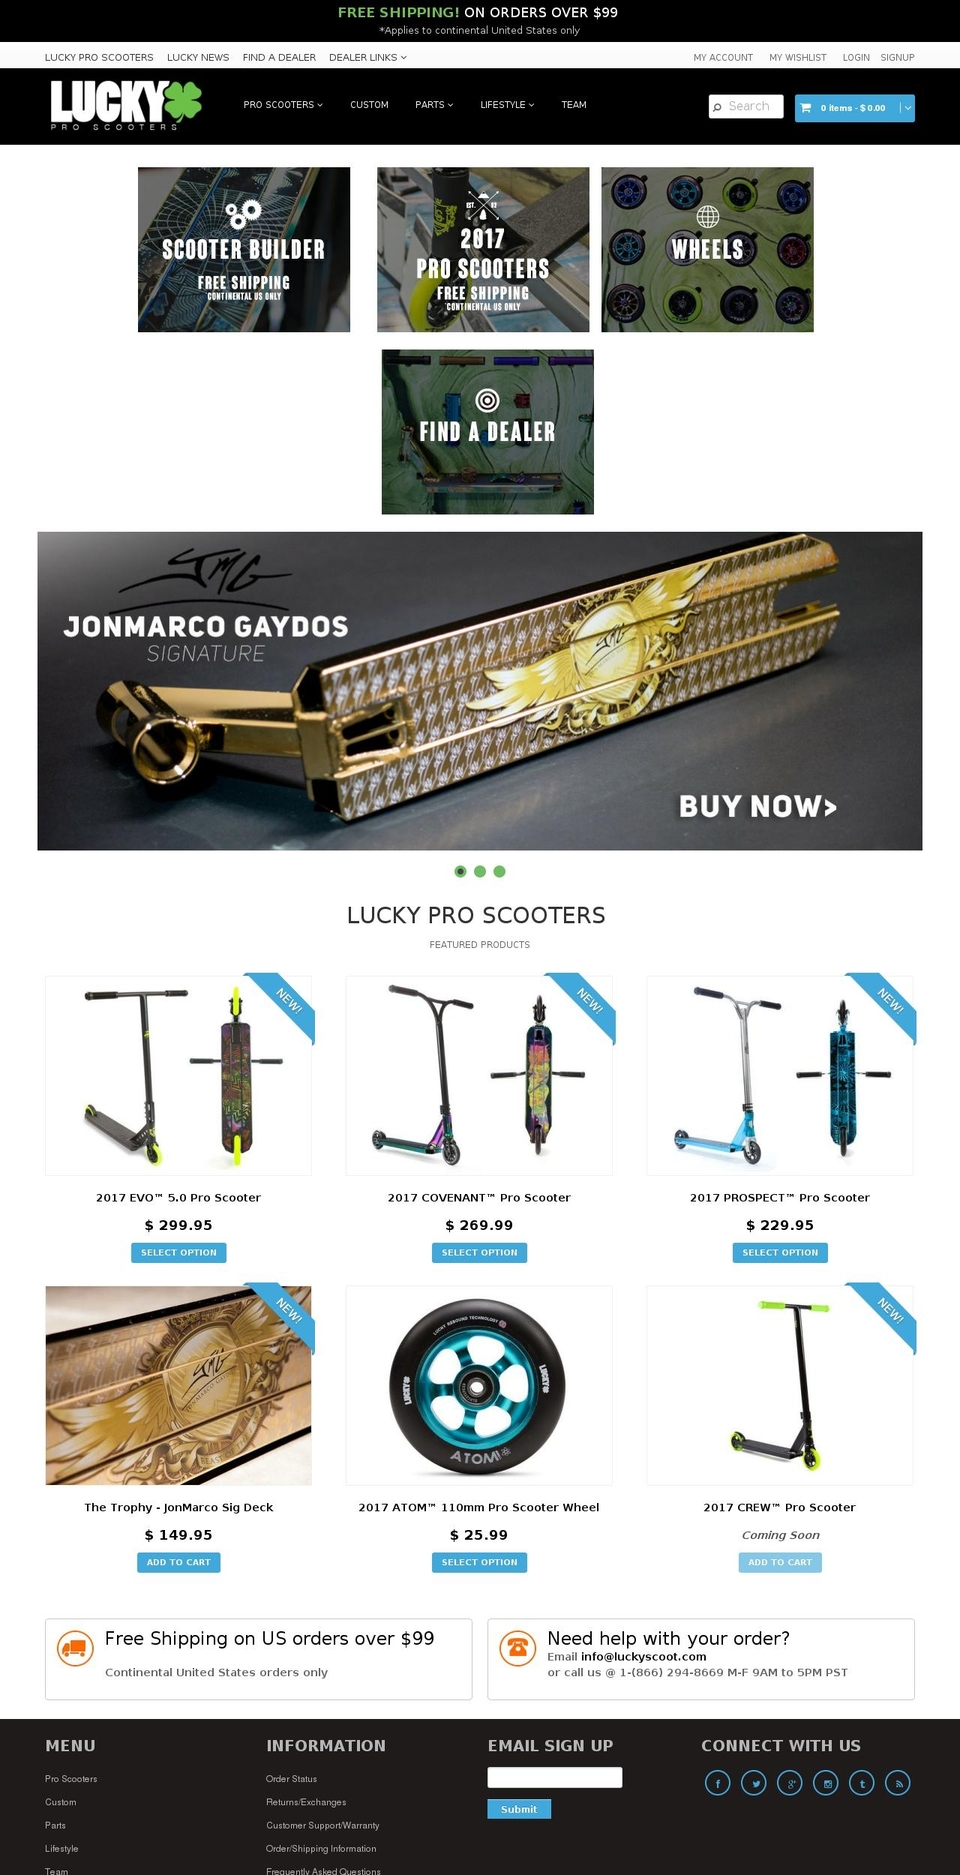 Lucky Scooters Live Theme 2-17-2017 Shopify theme site example lucky-scooters.org